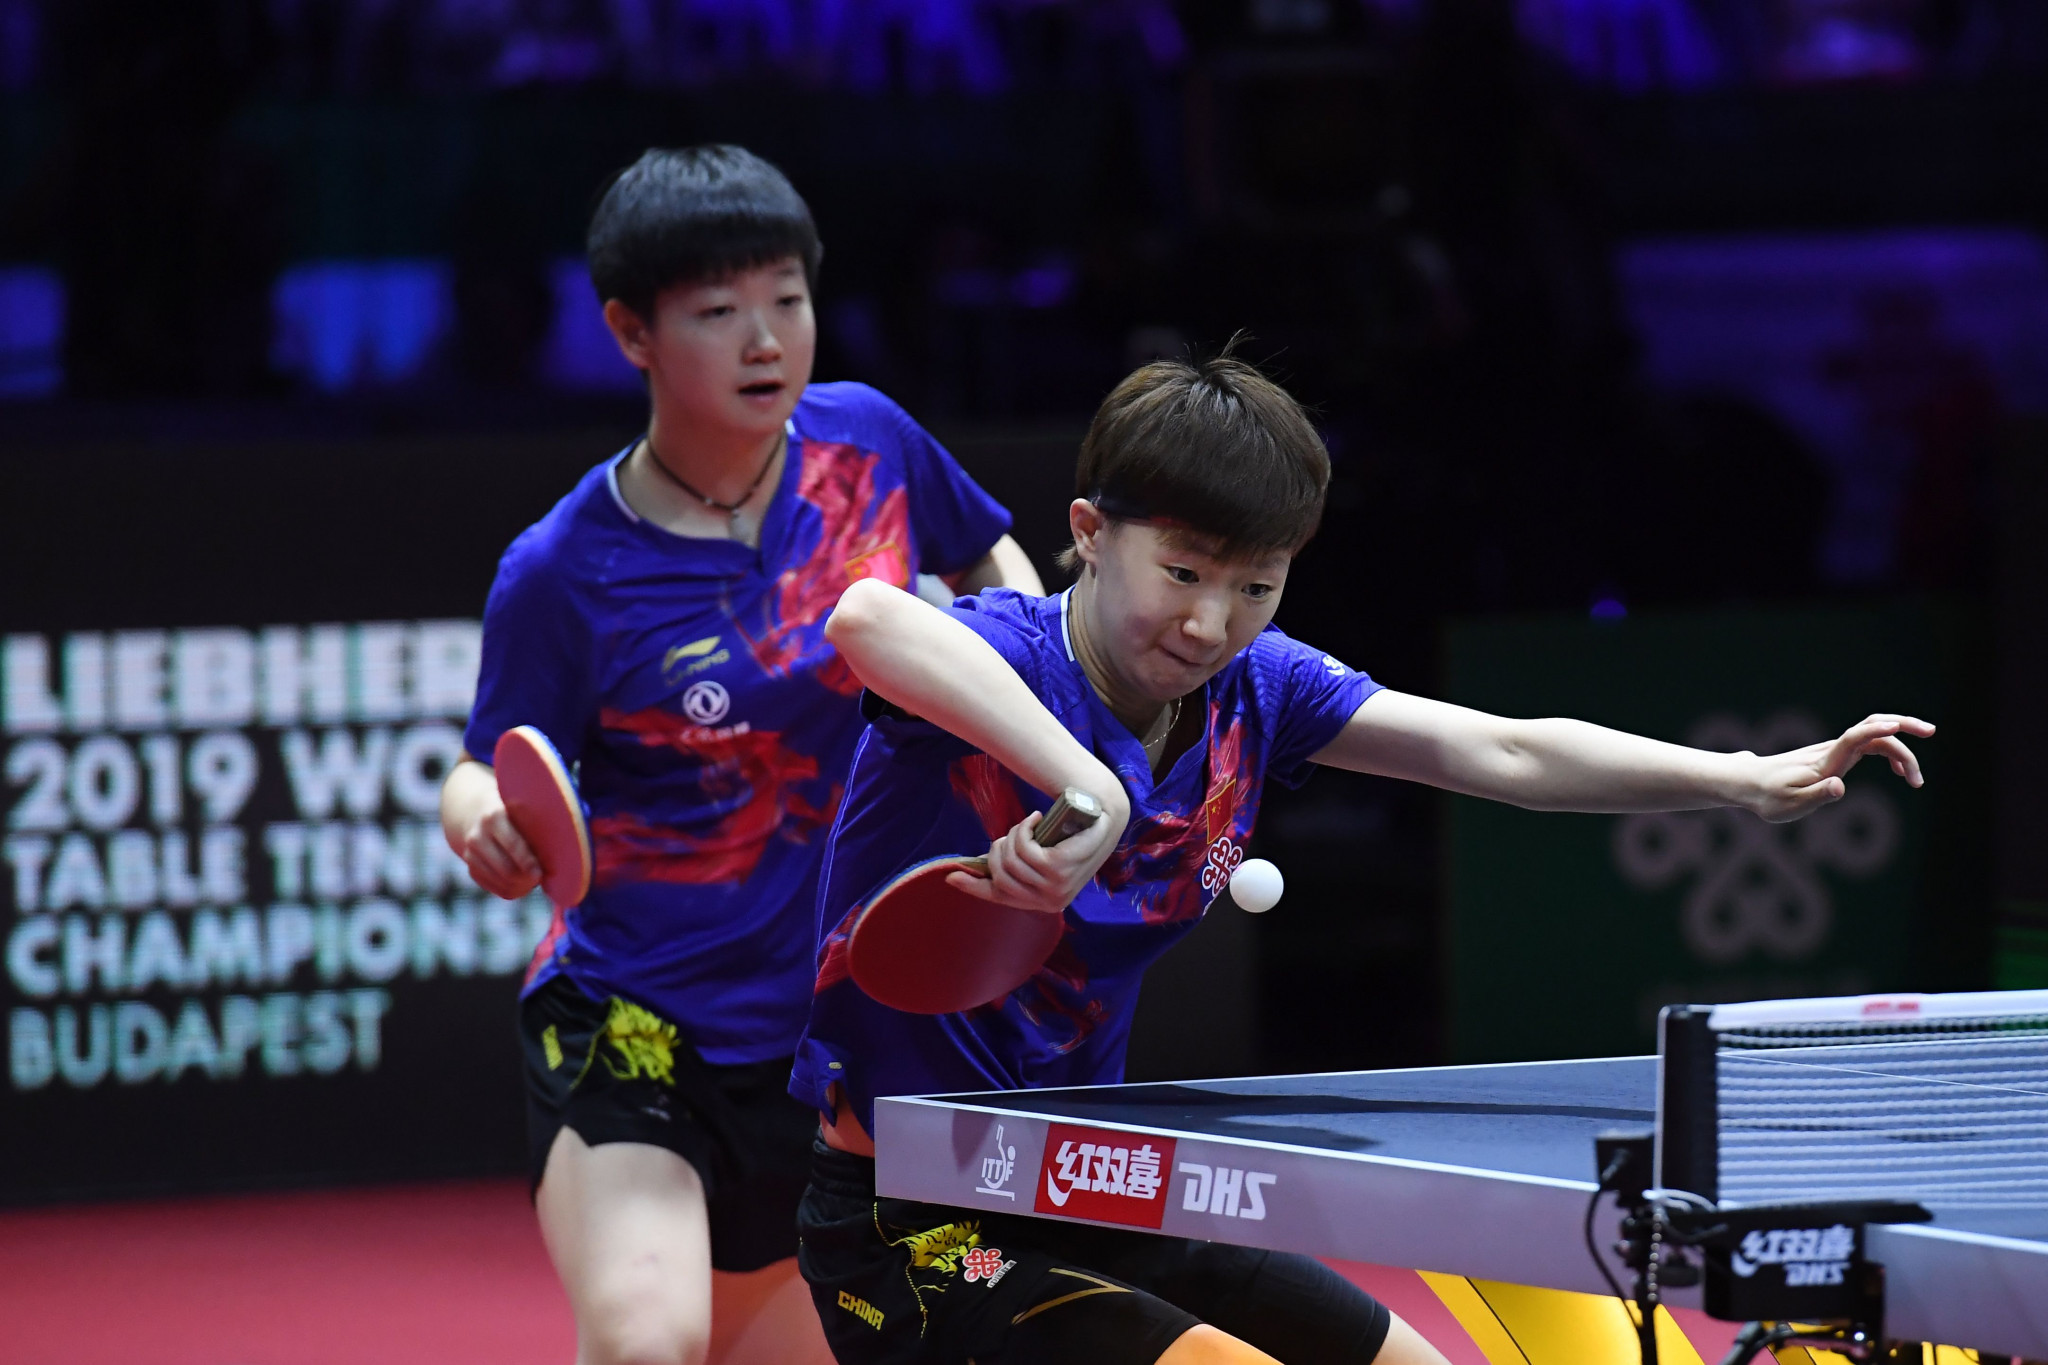 Chinese players won all five events the last time the World Table Tennis Championships were held, including Wang Manyu and Sun Yingsha in women's doubles Â© Getty Images